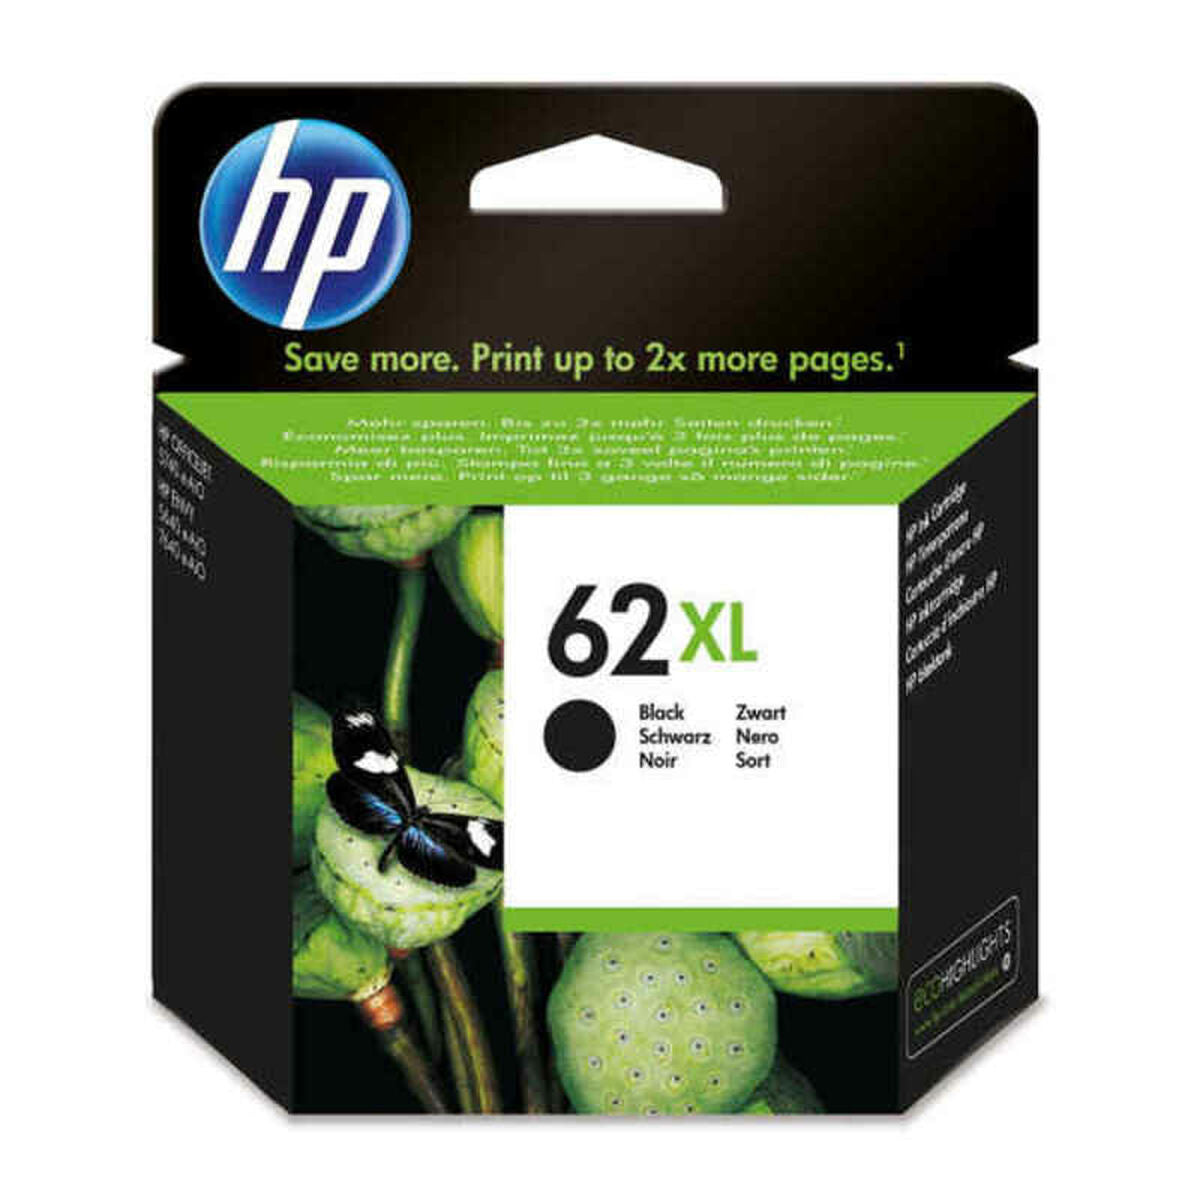 Compatible Ink Cartridge HP C2P05AE#UUS Black, HP, Computing, Printers and accessories, compatible-ink-cartridge-hp-c2p05ae-uus-black-1, Brand_HP, category-reference-2609, category-reference-2617, category-reference-2619, category-reference-t-19685, category-reference-t-19911, category-reference-t-21377, category-reference-t-25688, category-reference-t-29848, Condition_NEW, office, Price_50 - 100, Teleworking, RiotNook